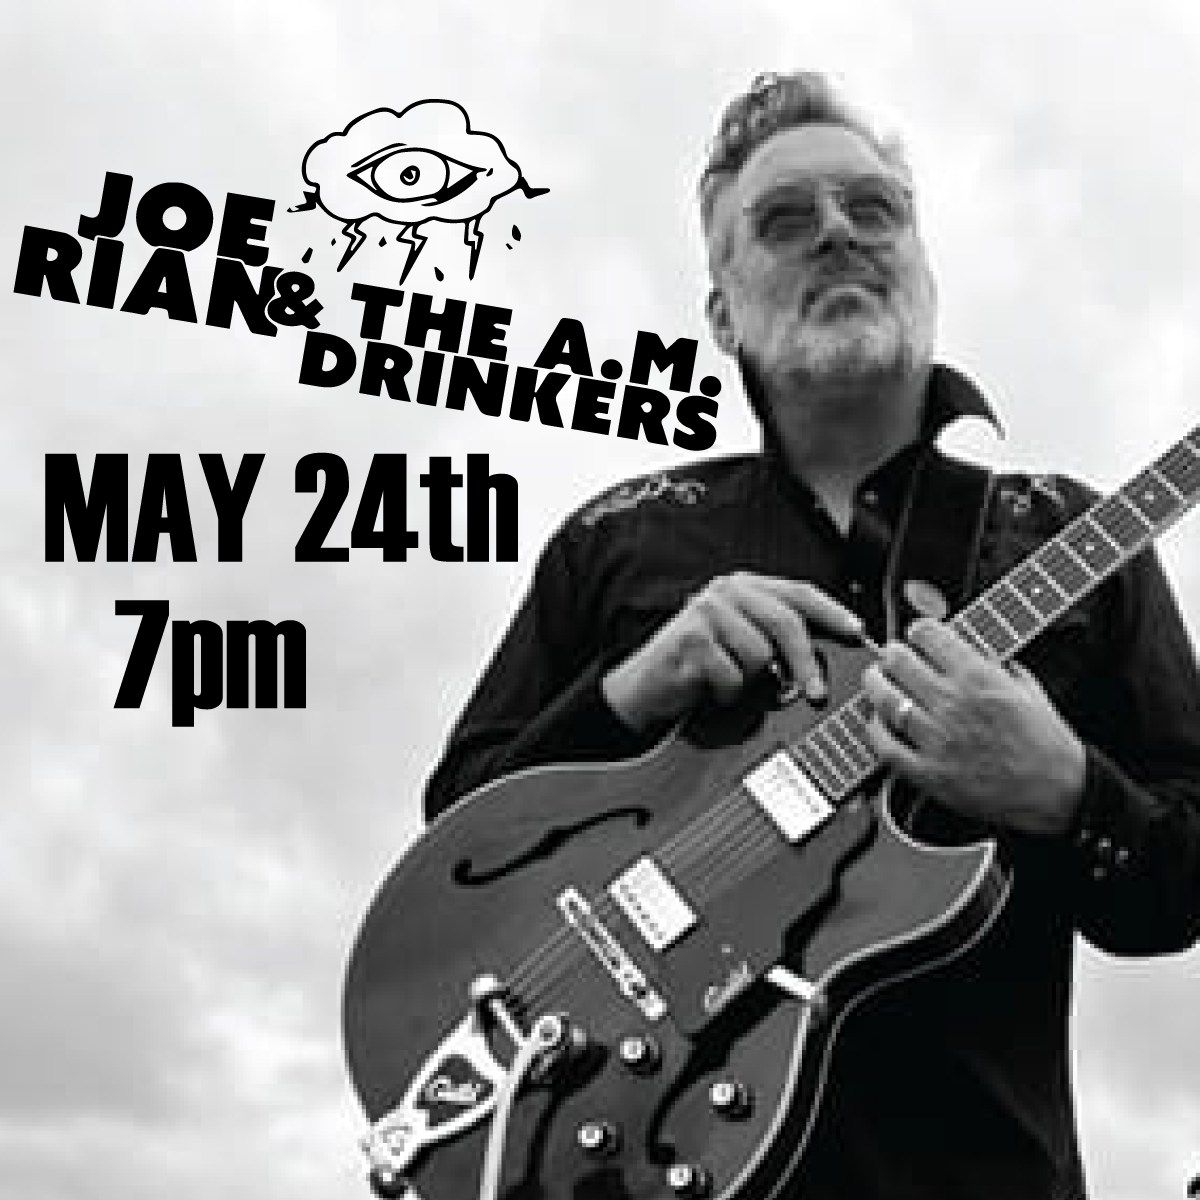 Live Music-Joe Rian and the A.M. Drinkers